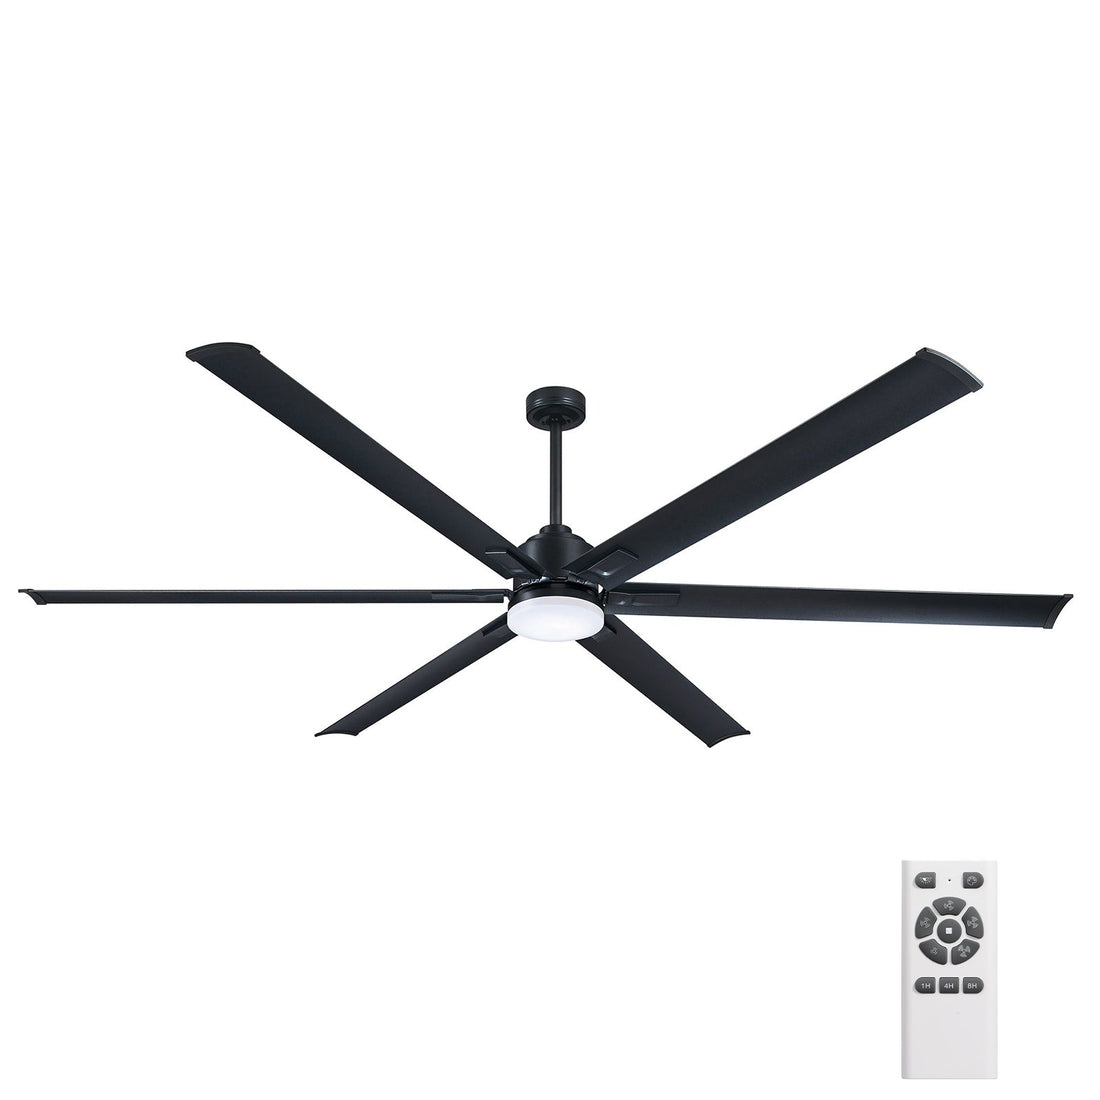 Rhino 1.8m DC Ceiling Fan with LED Light and Remote Mercator